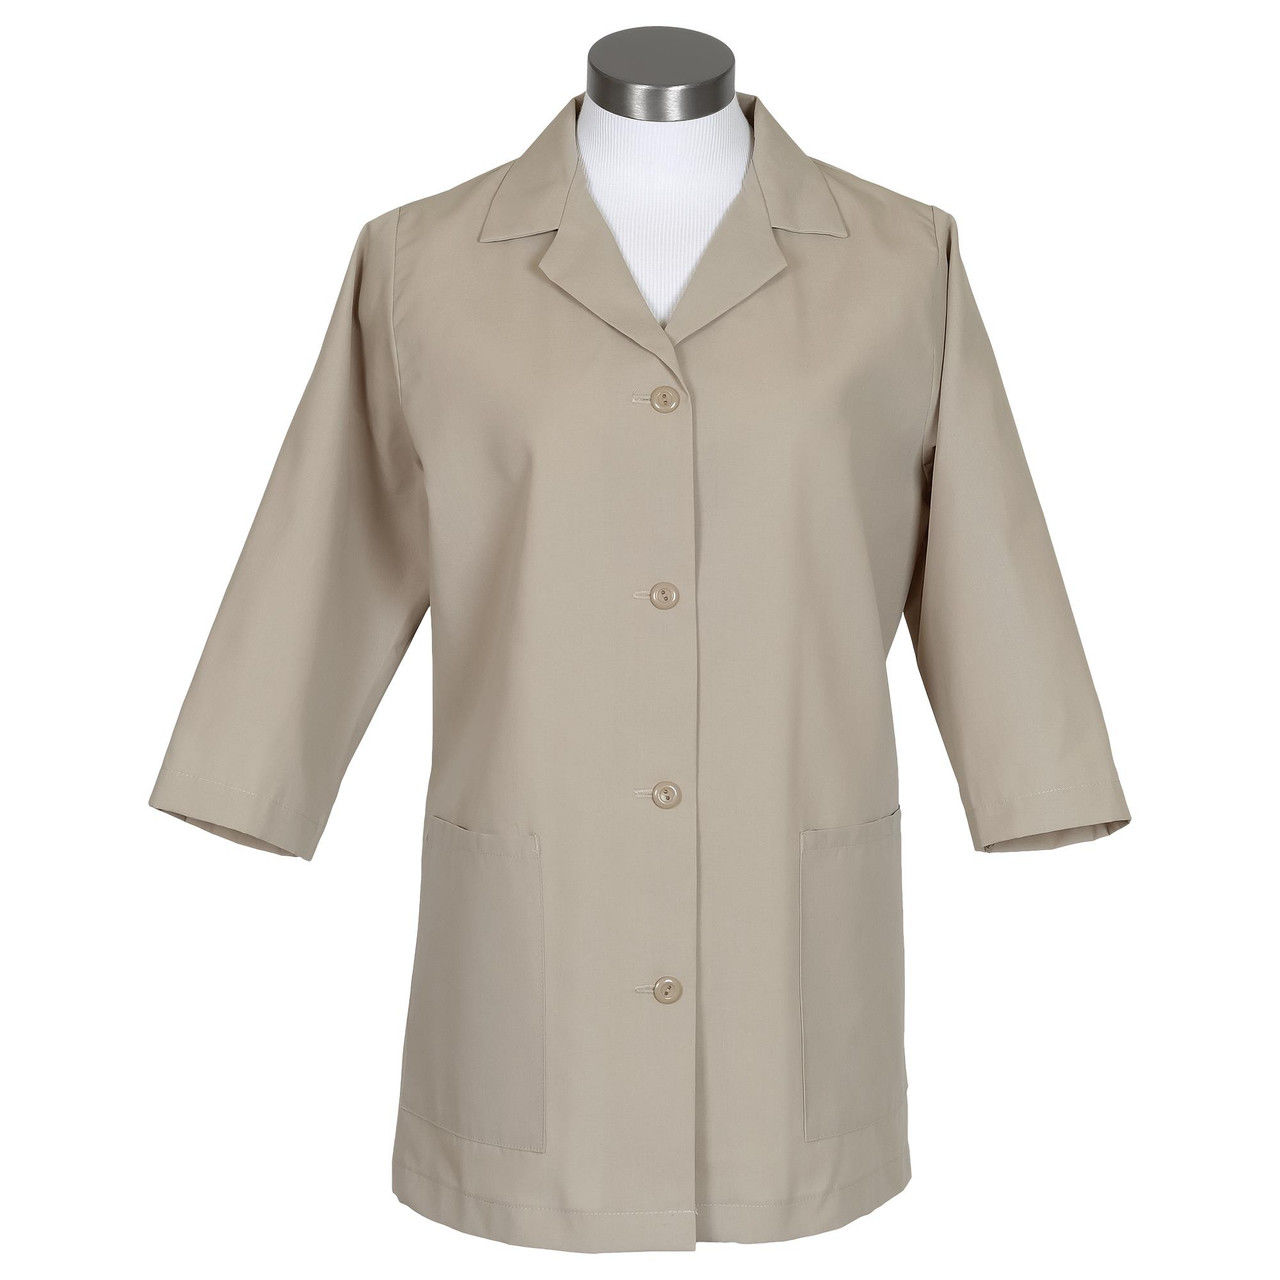 Can you tell me the country of production for the tan smock, specifically the 'Female Smock, Tan, Fame 72'?